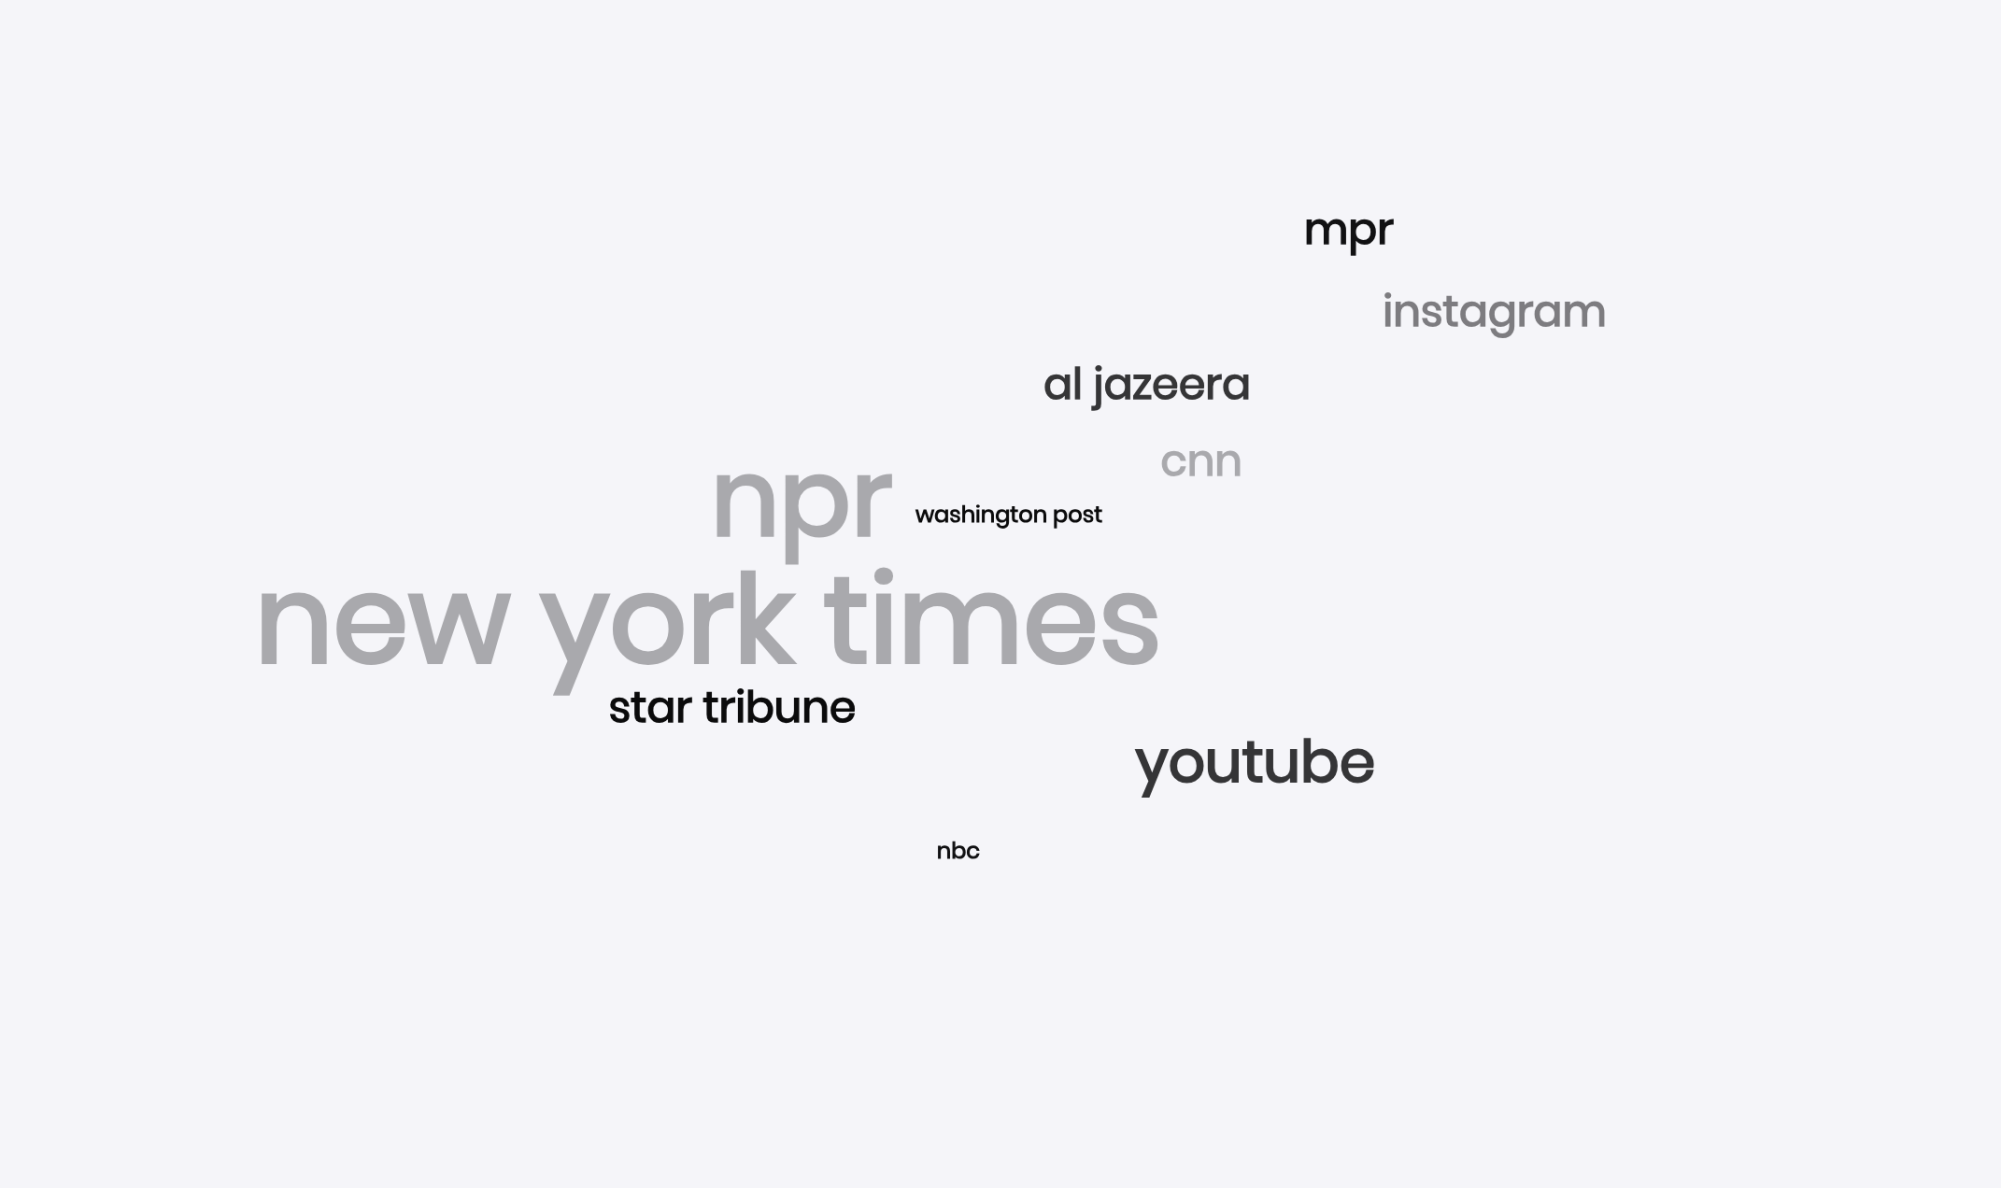 NEWS SOURCE. In a poll sent to the upper school student body, grades 9-12, students listed the New York Times, National Public Radio and Instagram, and specific accounts on YouTube as their primary sources for news. (Image generated from Google Forms data at monkeylearn.com)